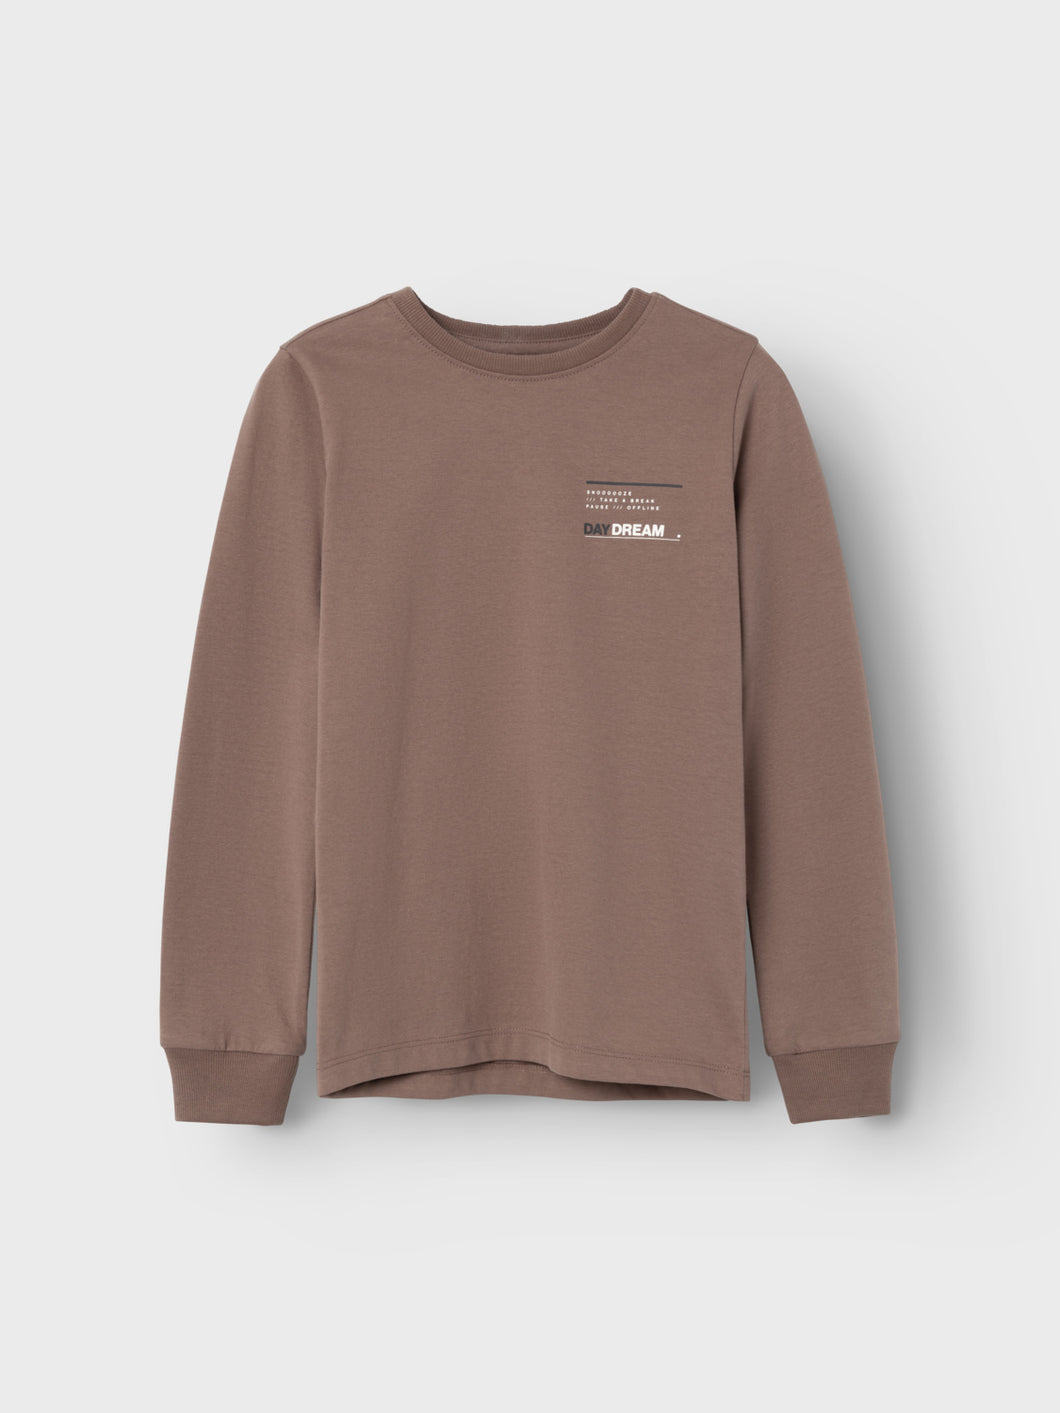 NKMODENZ T-Shirts & Tops - Deep Taupe